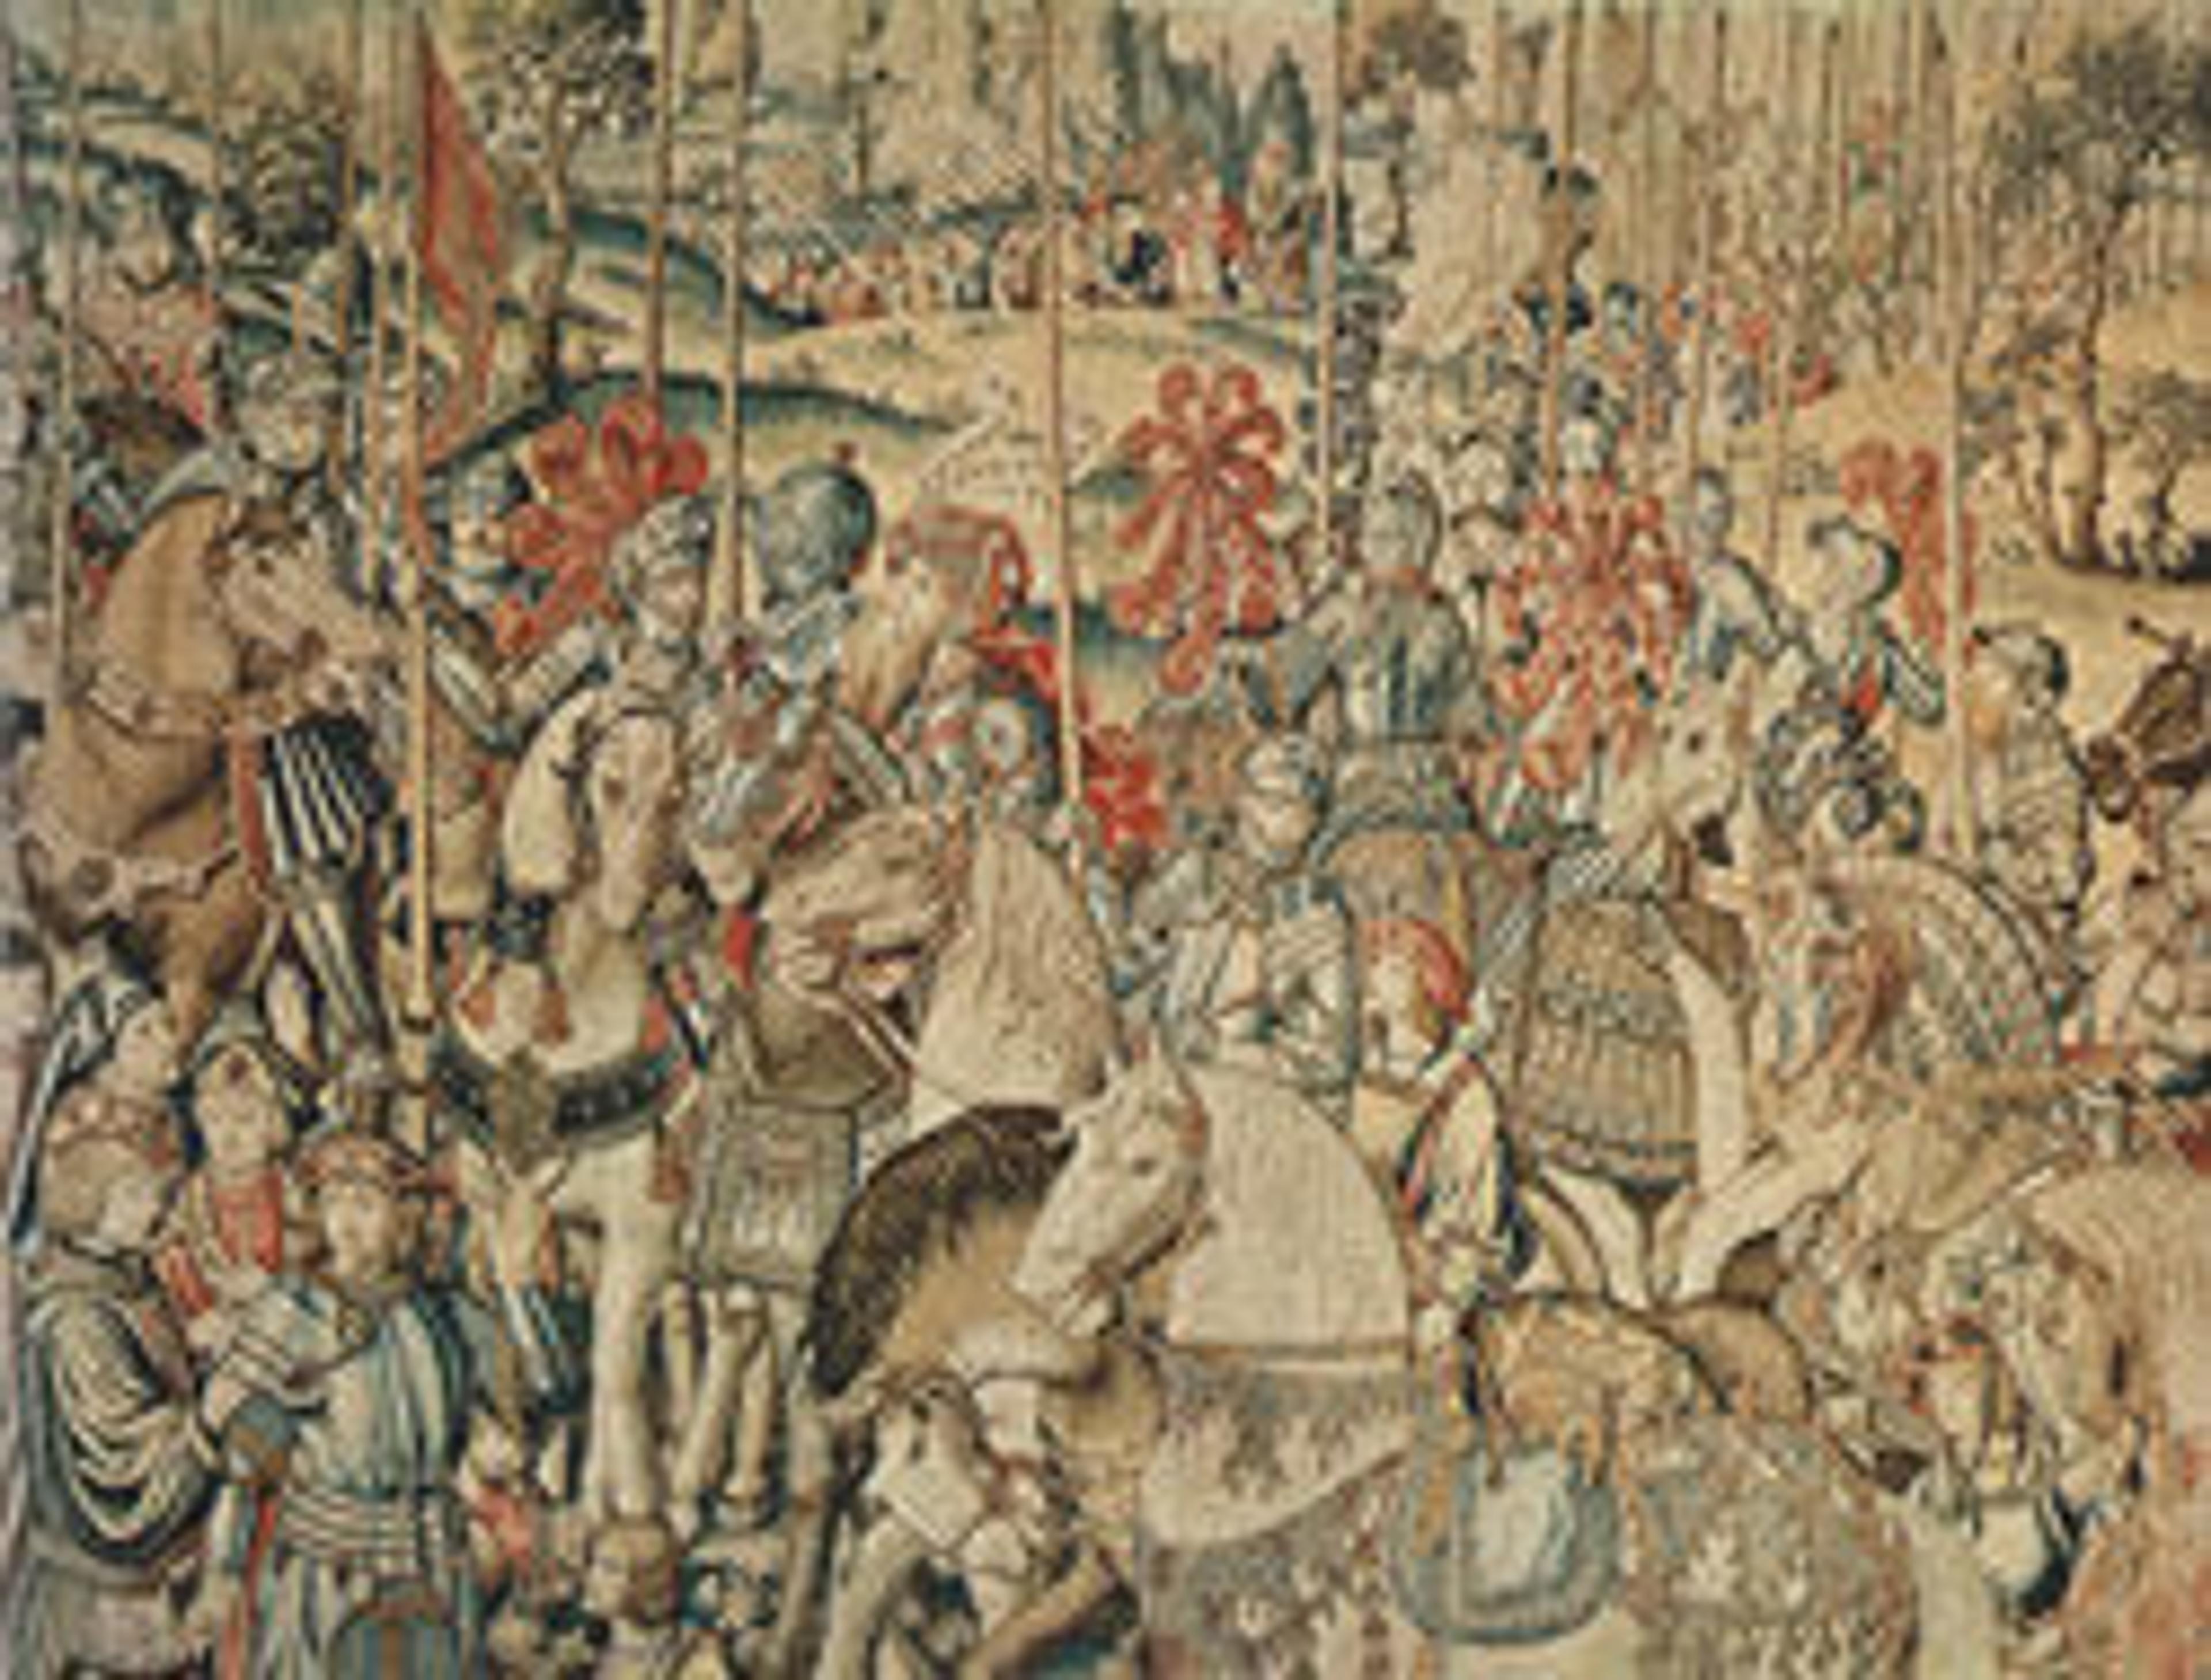 David and Bathsheba: Ten Early Sixteenth-Century Tapestries from the Cluny Museum in Paris